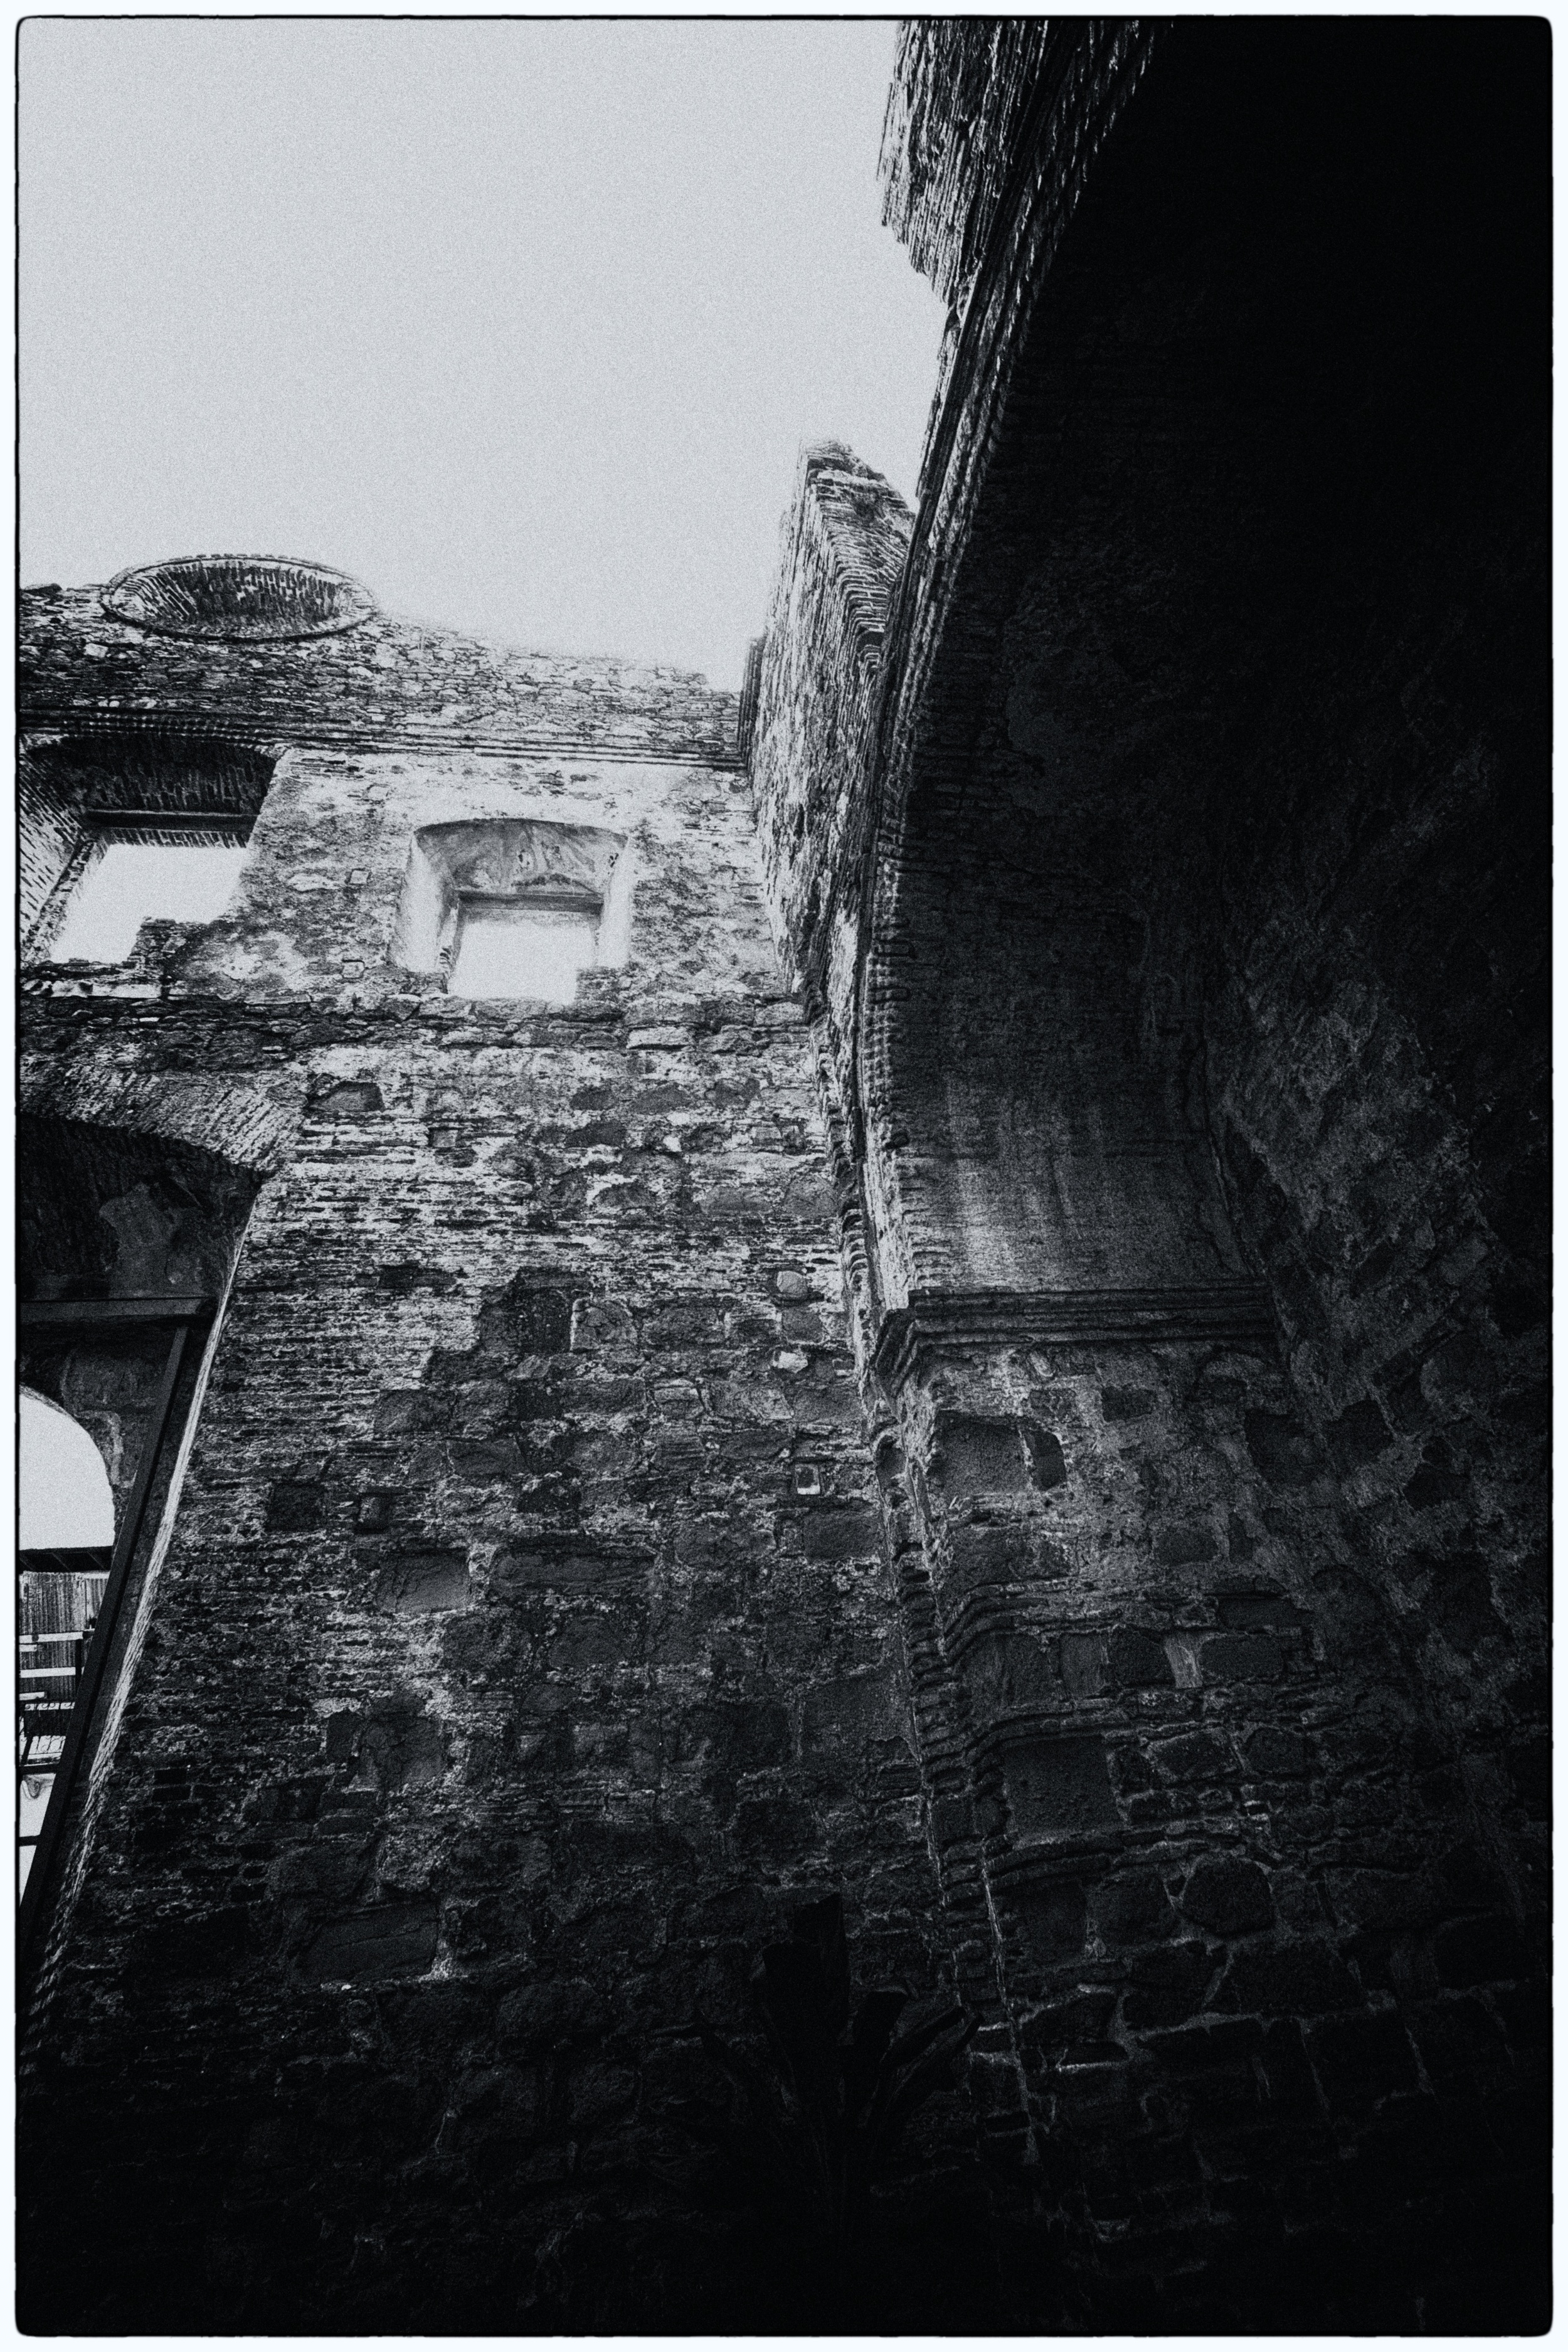 2012-12-31 at 10-06-39 Ancient, Arch, Architecture, Black & White, Concrete, Height, Stone, Tower.jpg